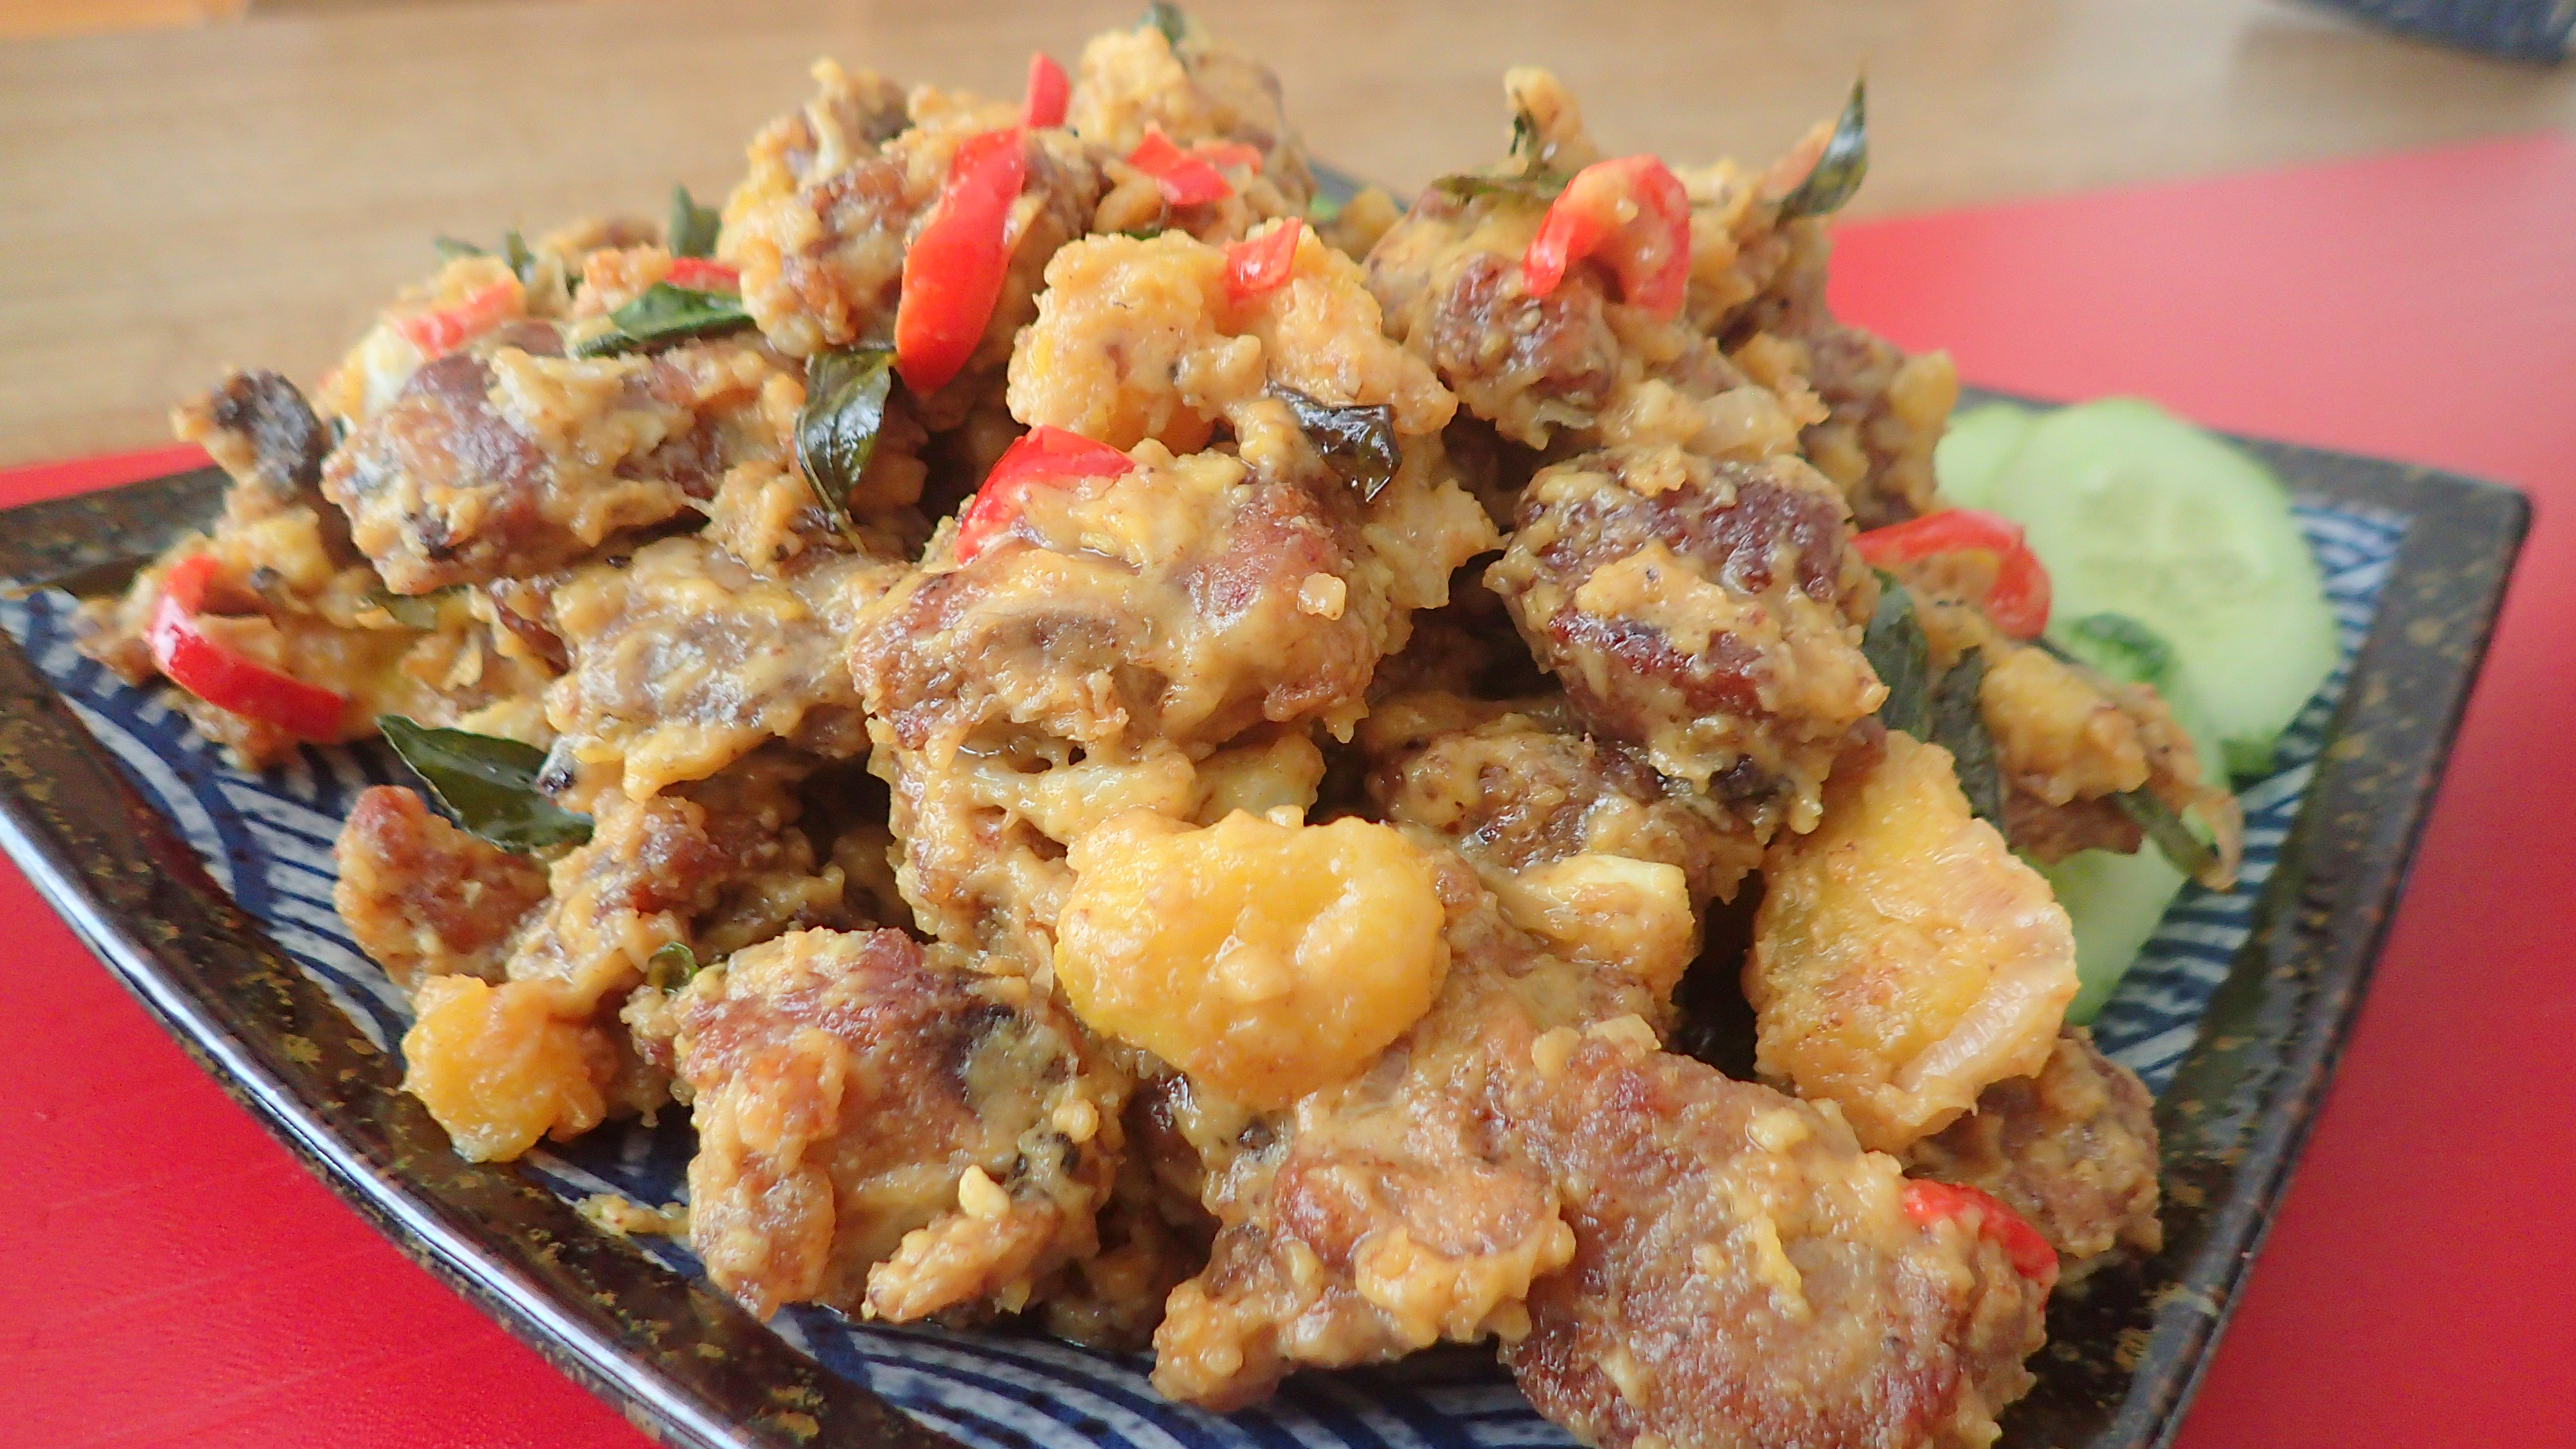 Salted Egg Yolks Butter Pork Ribs – 牛油黃金排骨 with curry leaves & fresh chillies